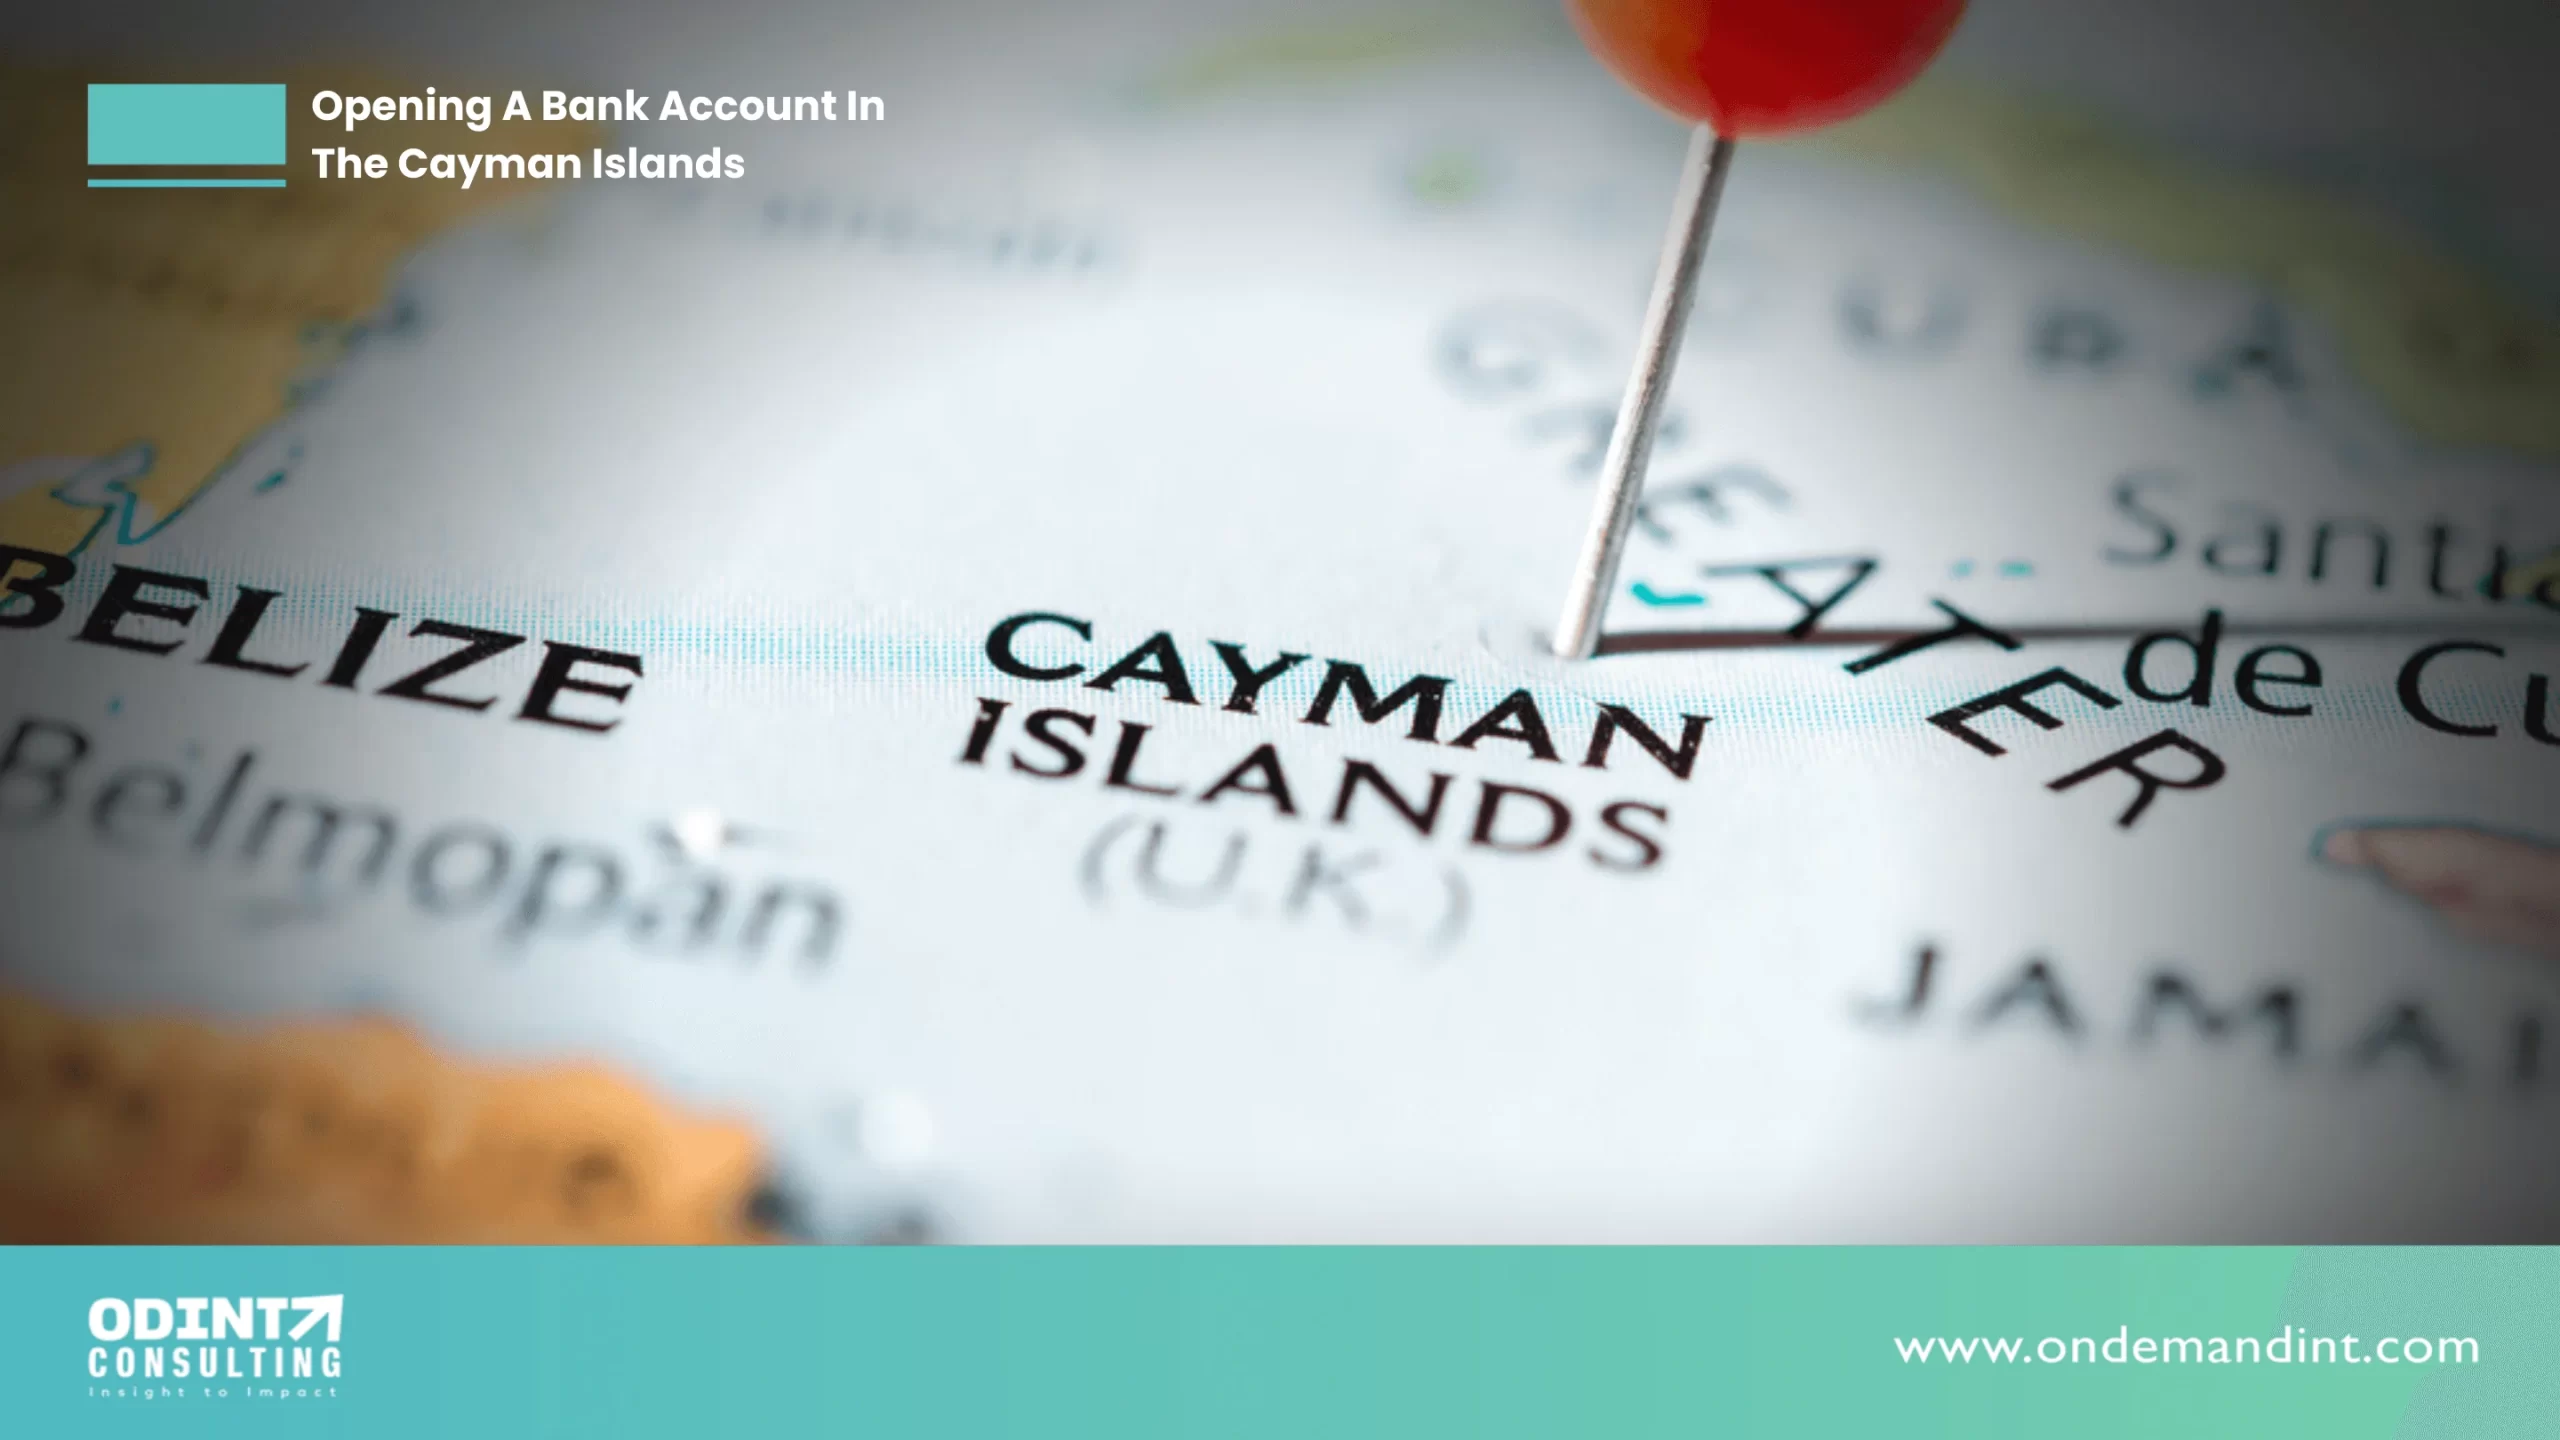 Guide To Opening A Bank Account In The Cayman Islands: Procedure, Documents & Advantages